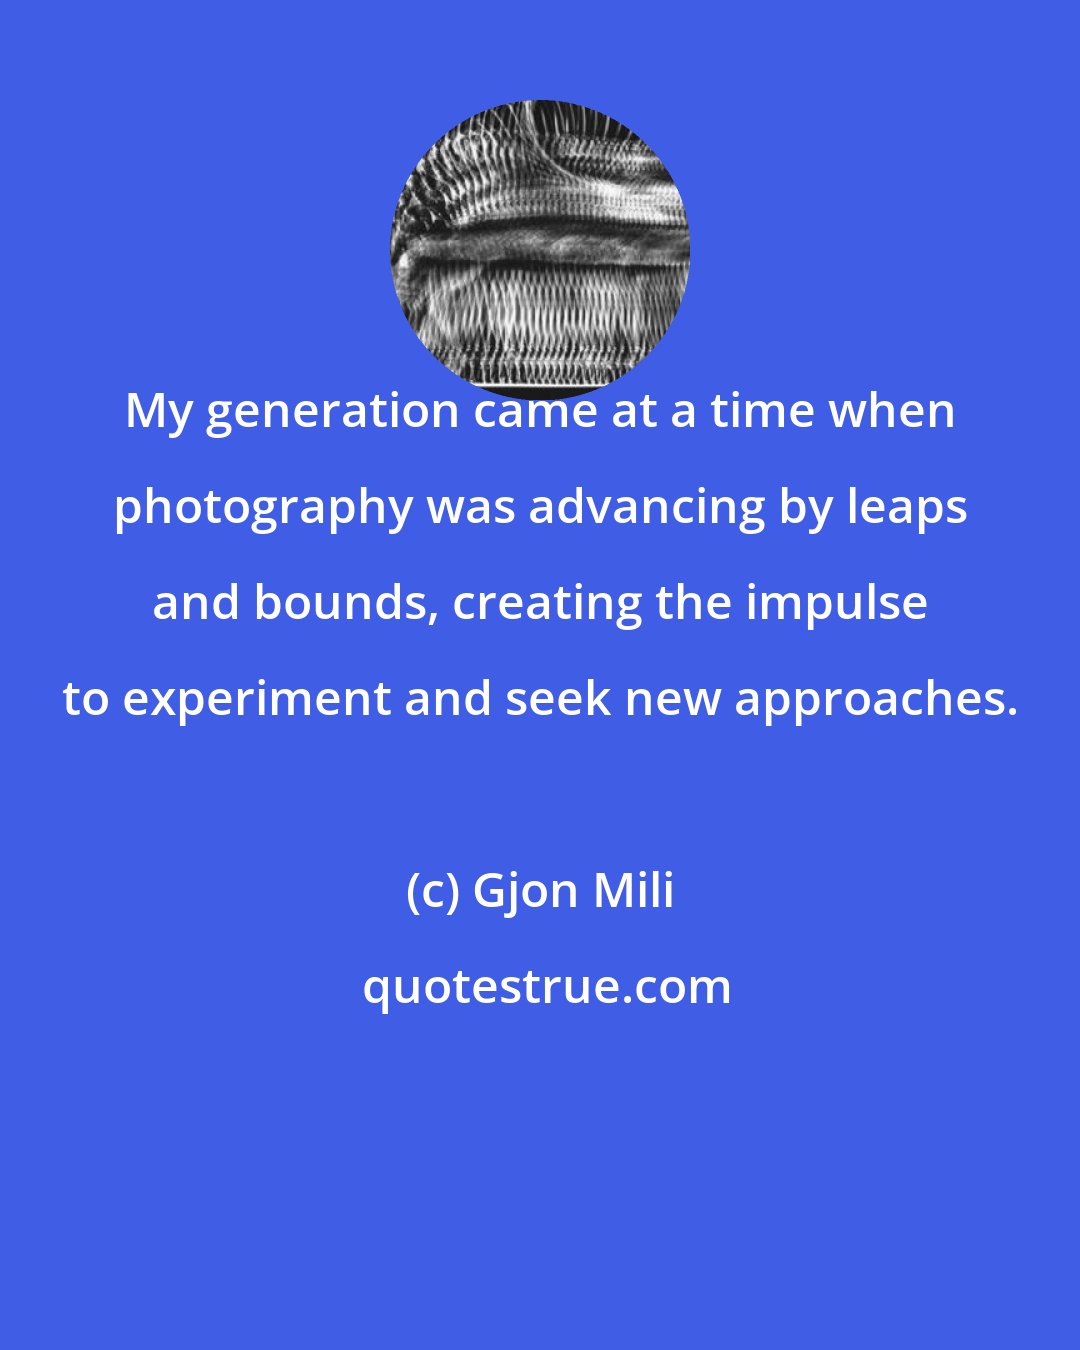 Gjon Mili: My generation came at a time when photography was advancing by leaps and bounds, creating the impulse to experiment and seek new approaches.